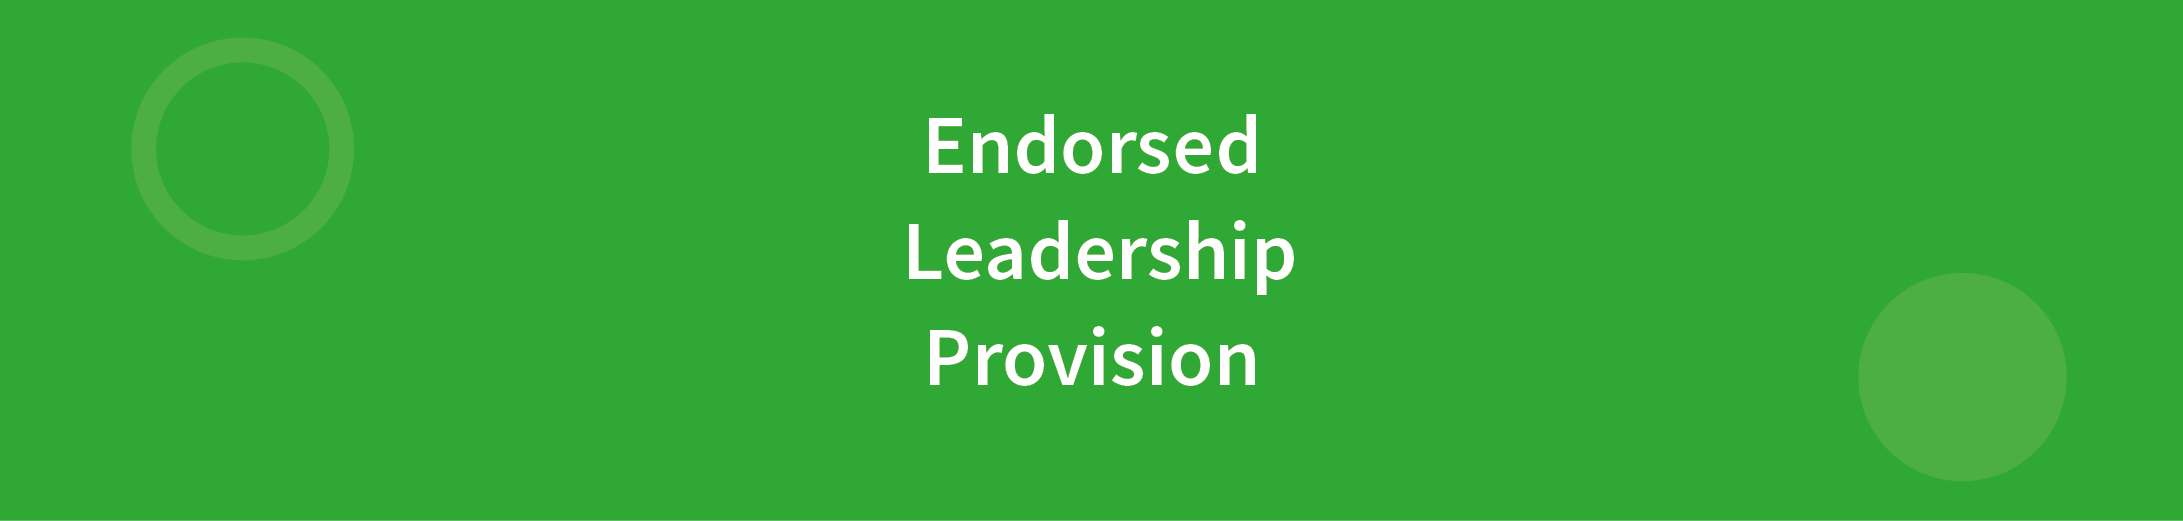 Endorsed Leadership Provision written in white on green background